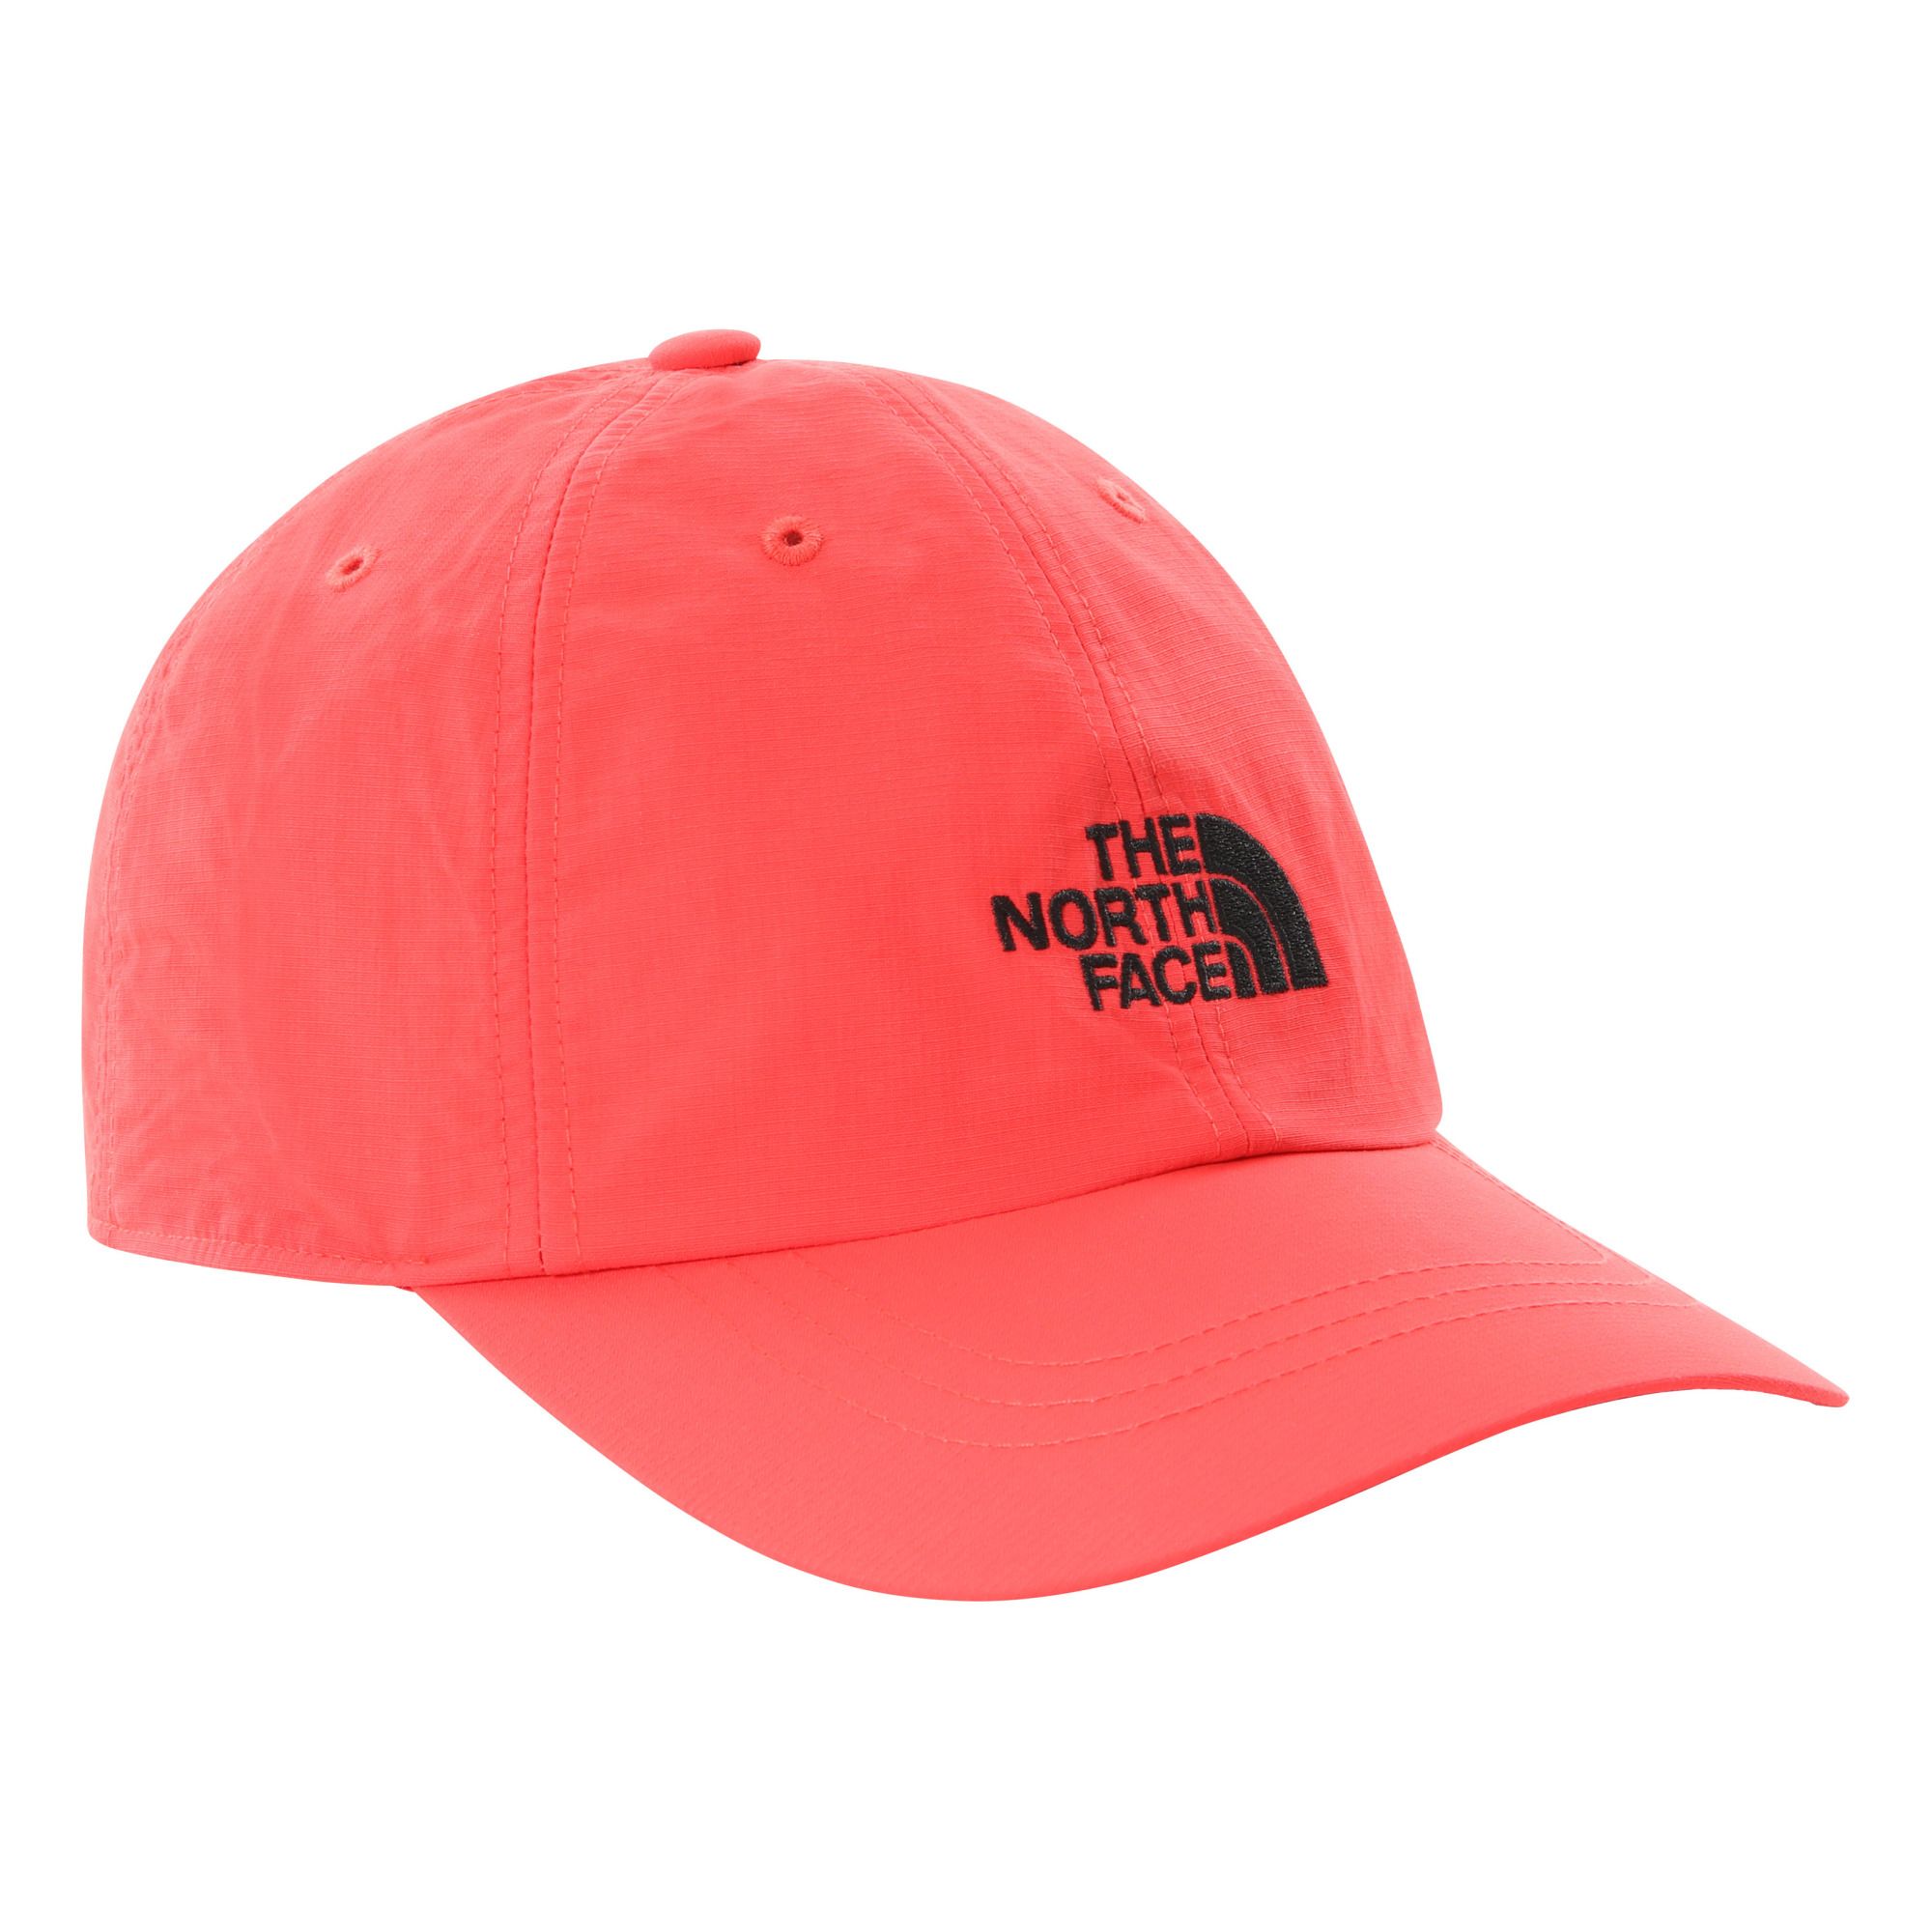 The North Face - Casquette - Collection Homme - - Homme - Rouge